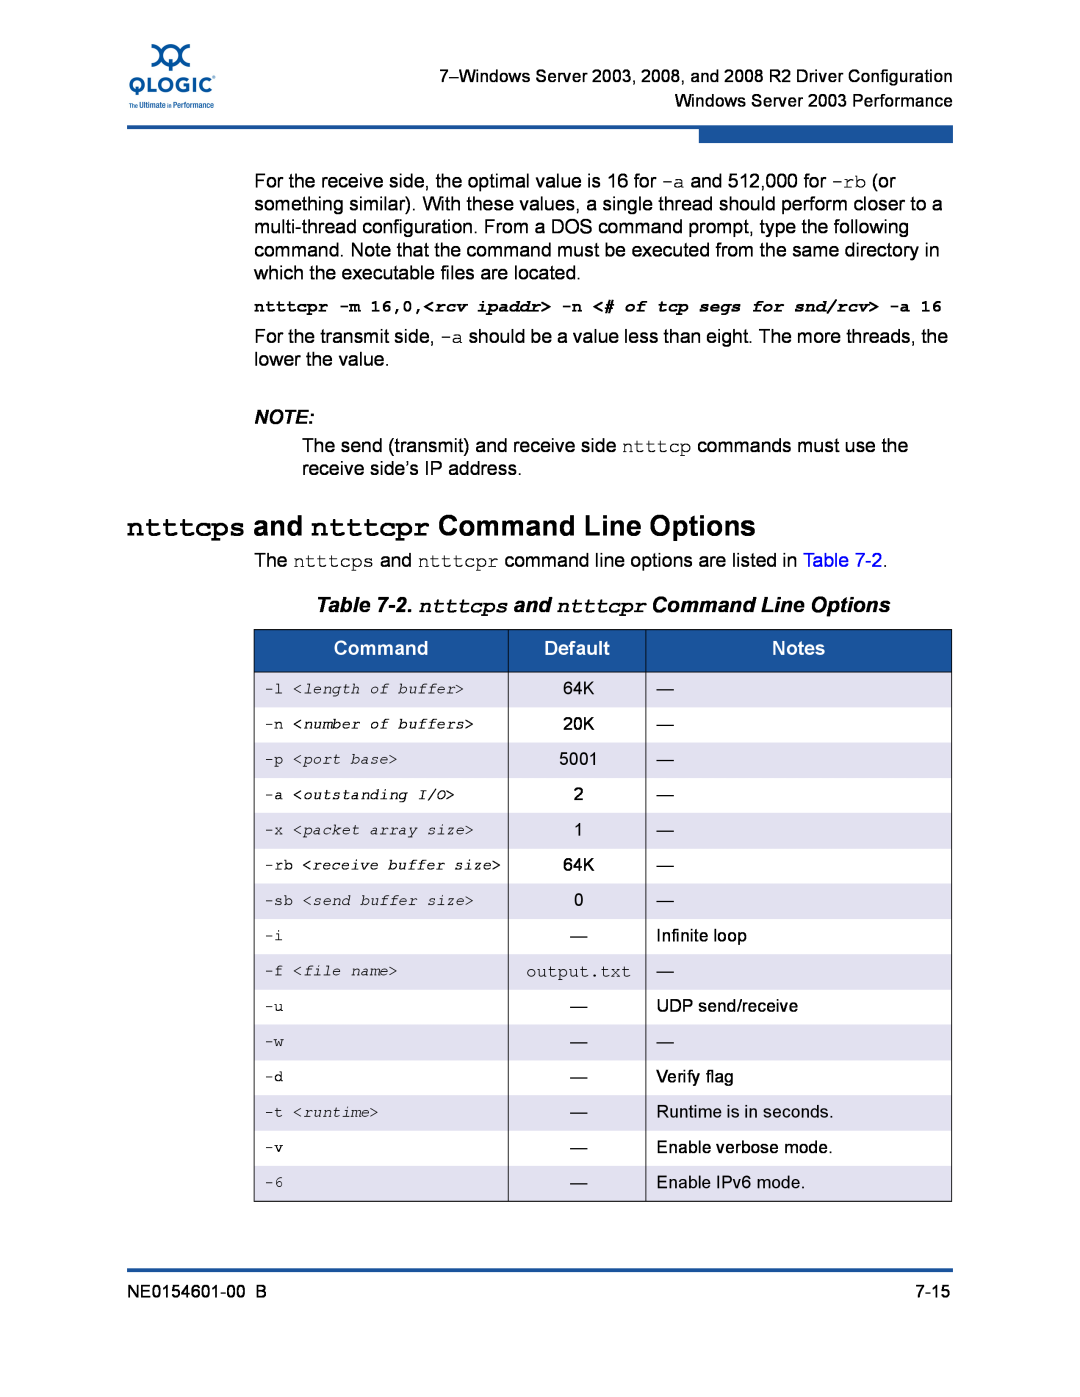 Q-Logic 3000, 3100 manual 2. ntttcps and ntttcpr Command Line Options, Default 